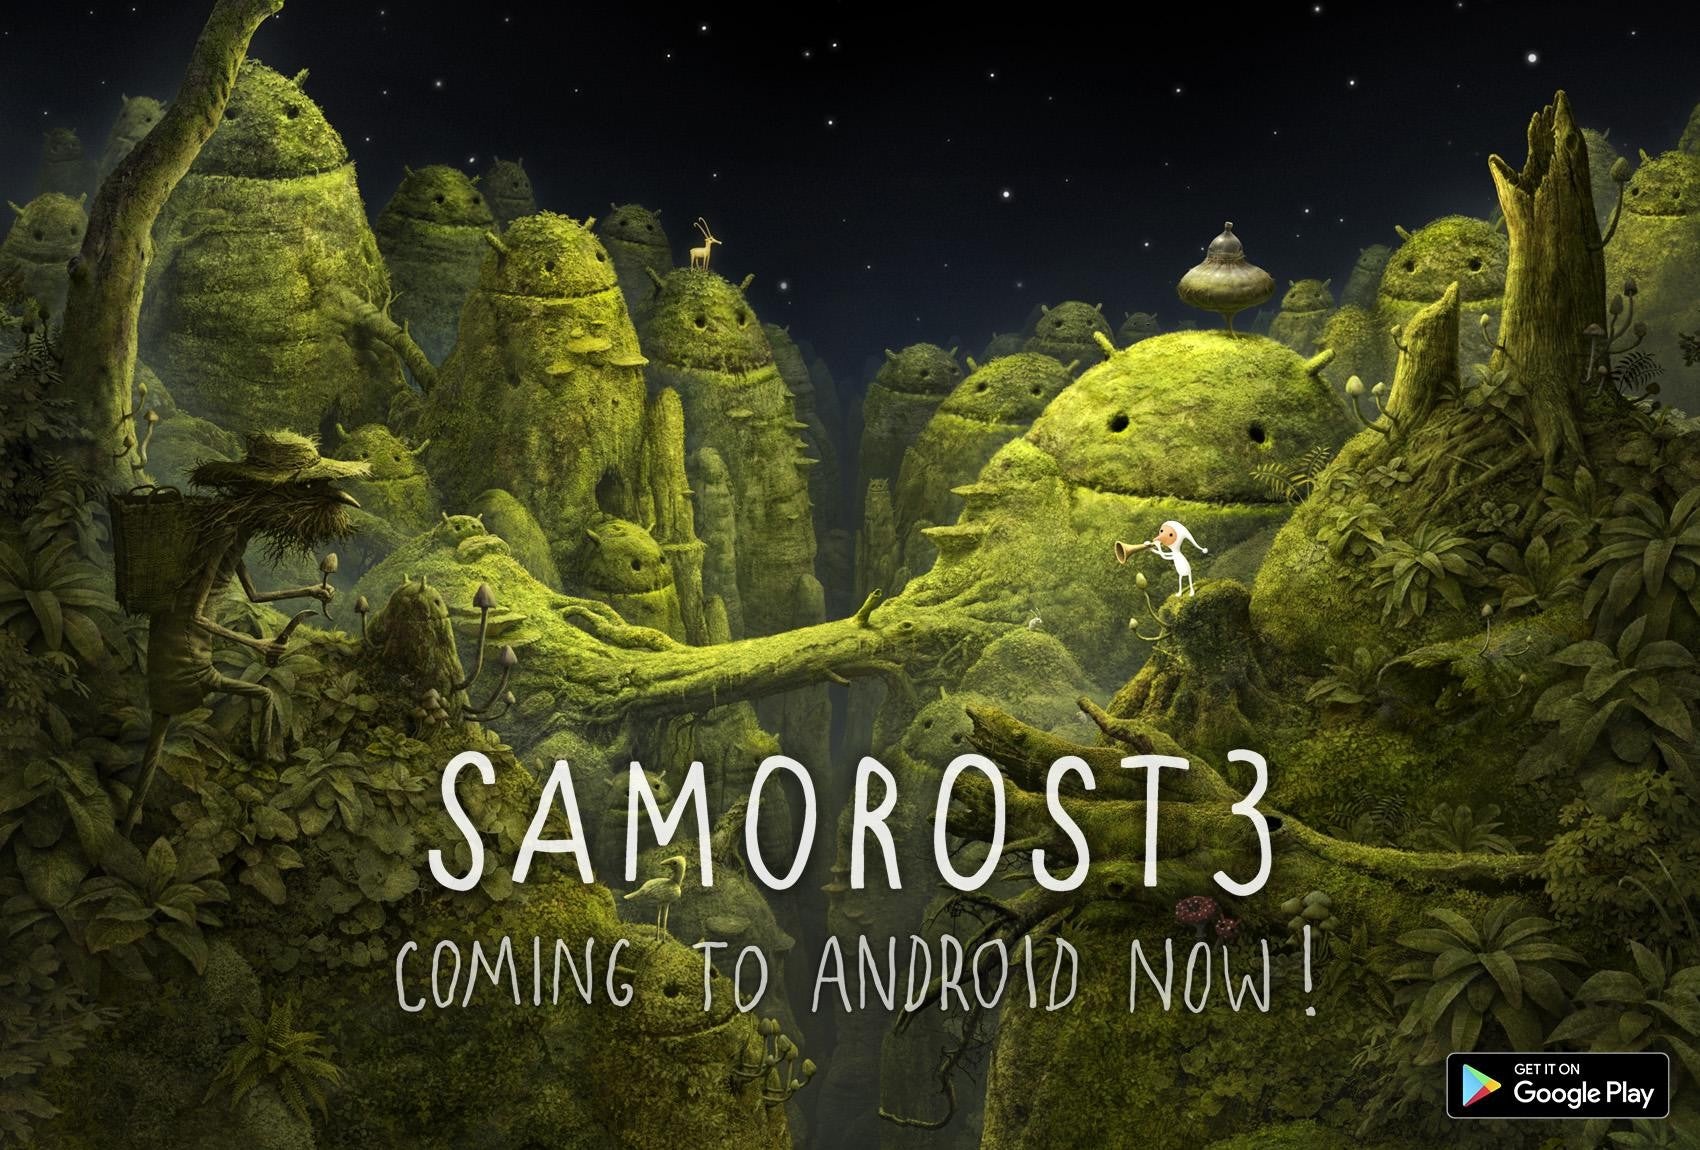 Samorost 3 point-and-click adventure game lands on Android